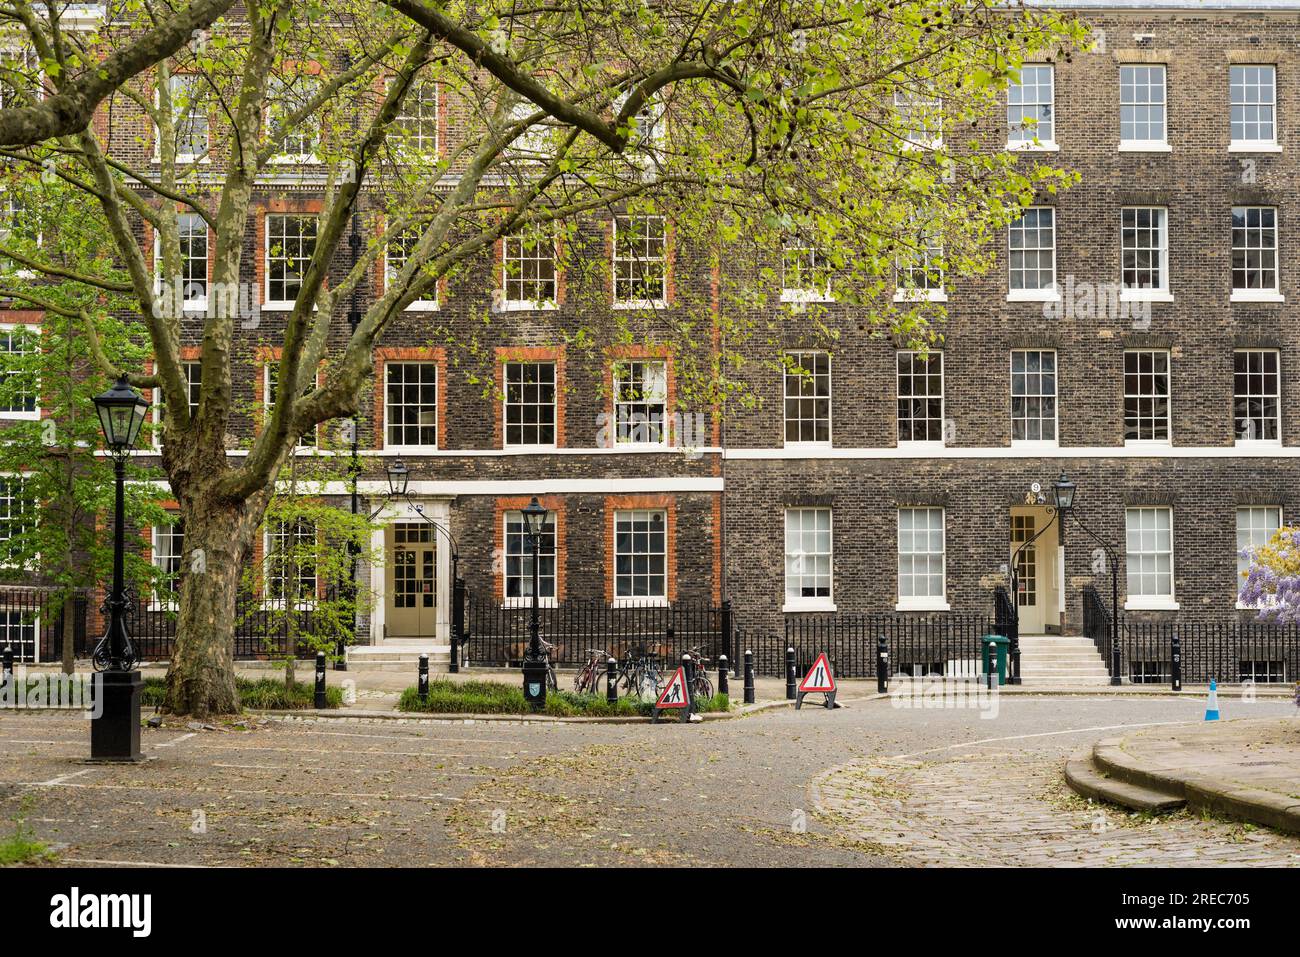 King's Bench Walk, Inner Temple, Barristers' chambers building, London, UK Stock Photo